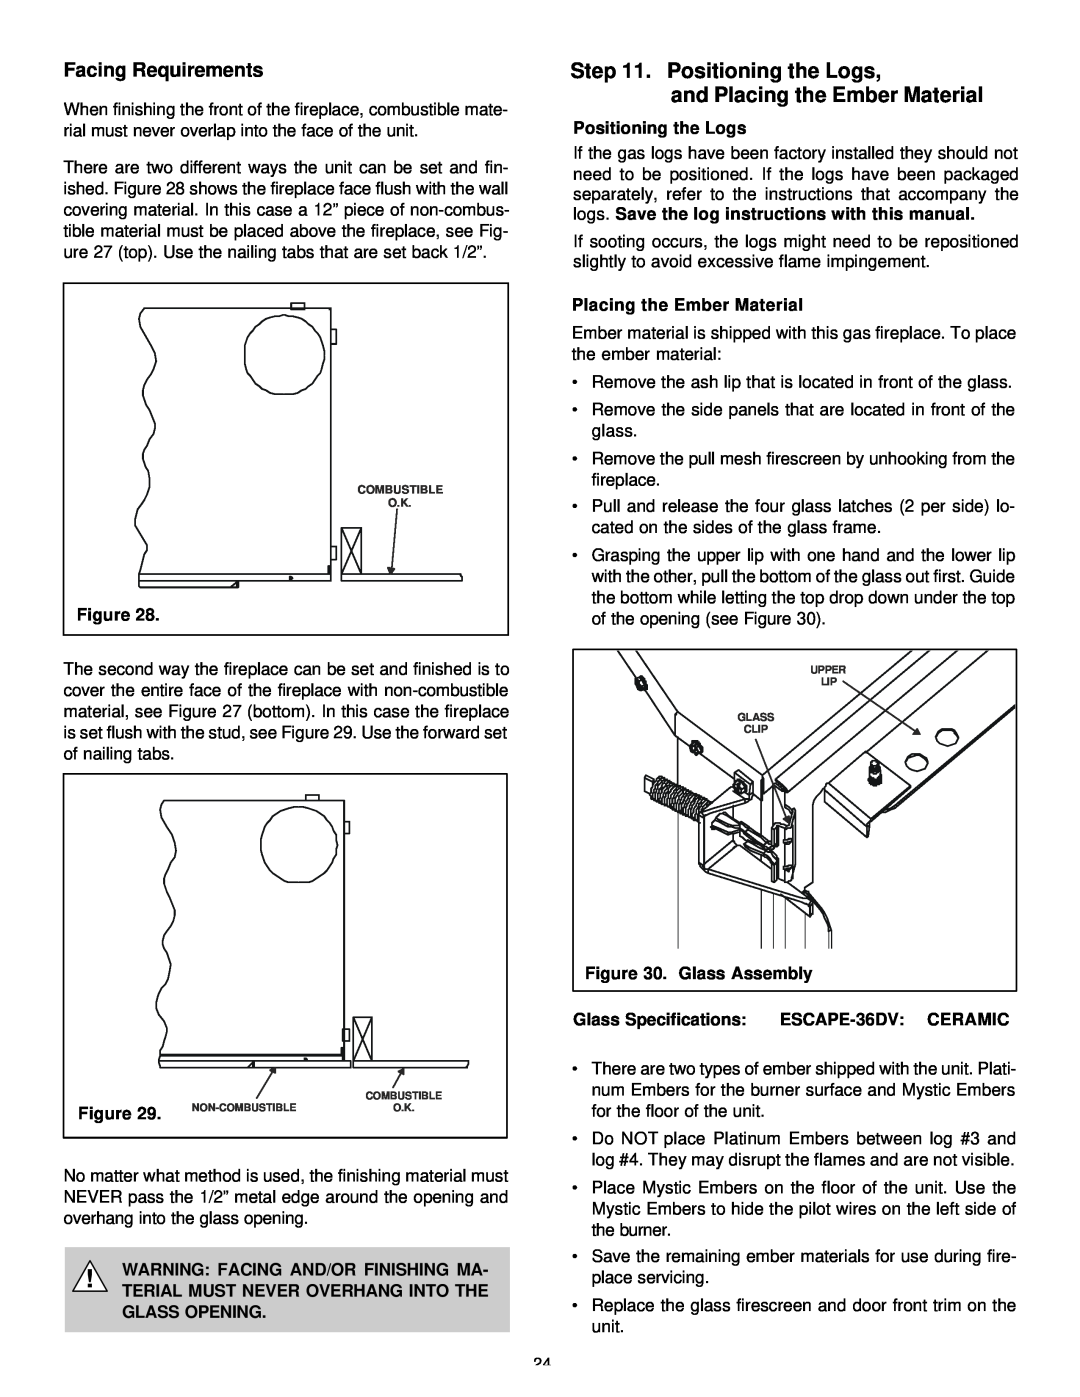 Heat & Glo LifeStyle 36DV manual Positioning the Logs, and Placing the Ember Material, Facing Requirements, Glass Assembly 